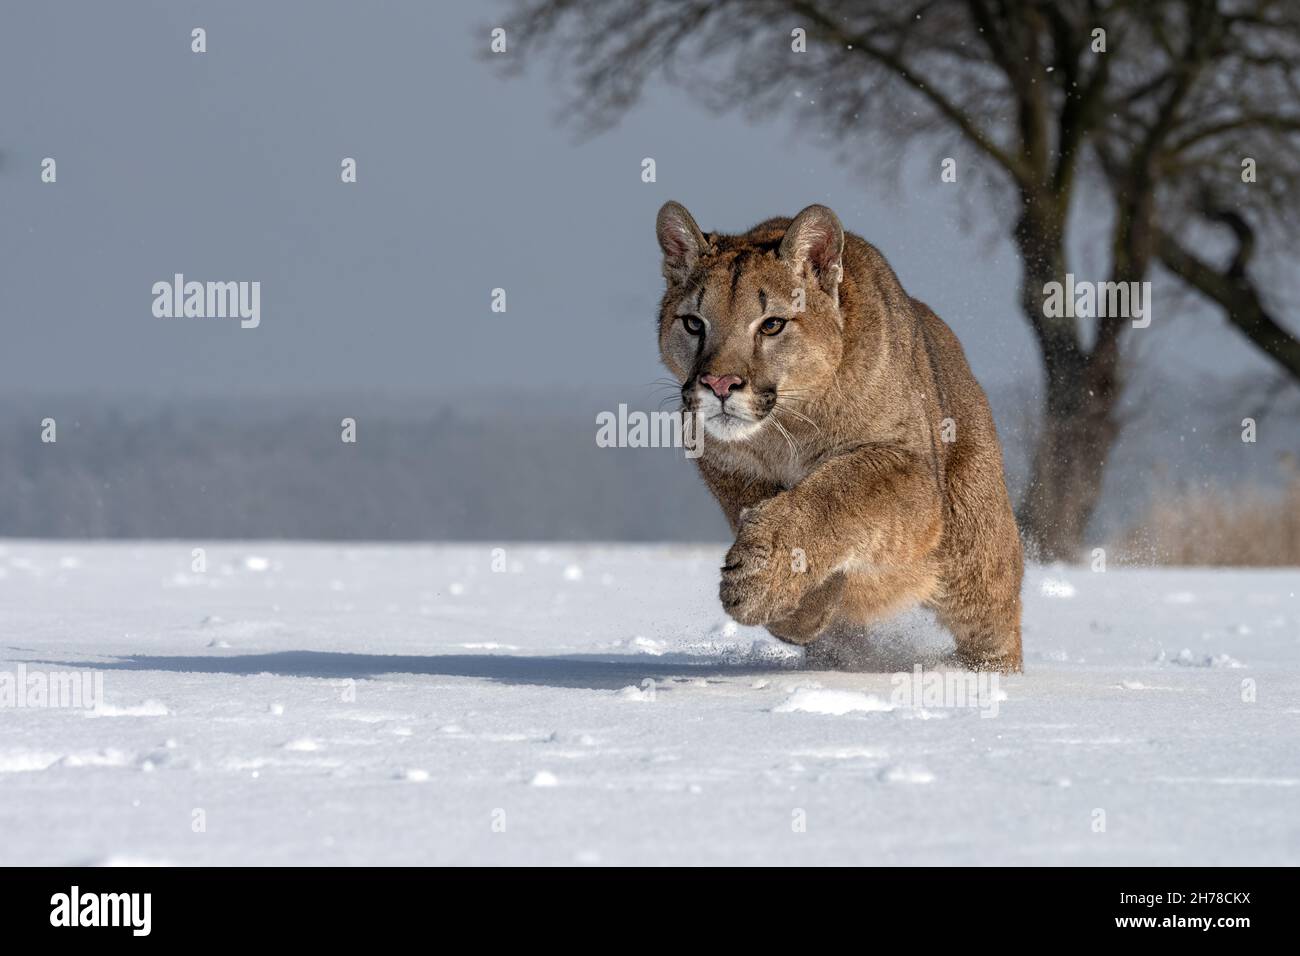 The American Cougar runs across the meadow and enjoys the snow. Stock Photo